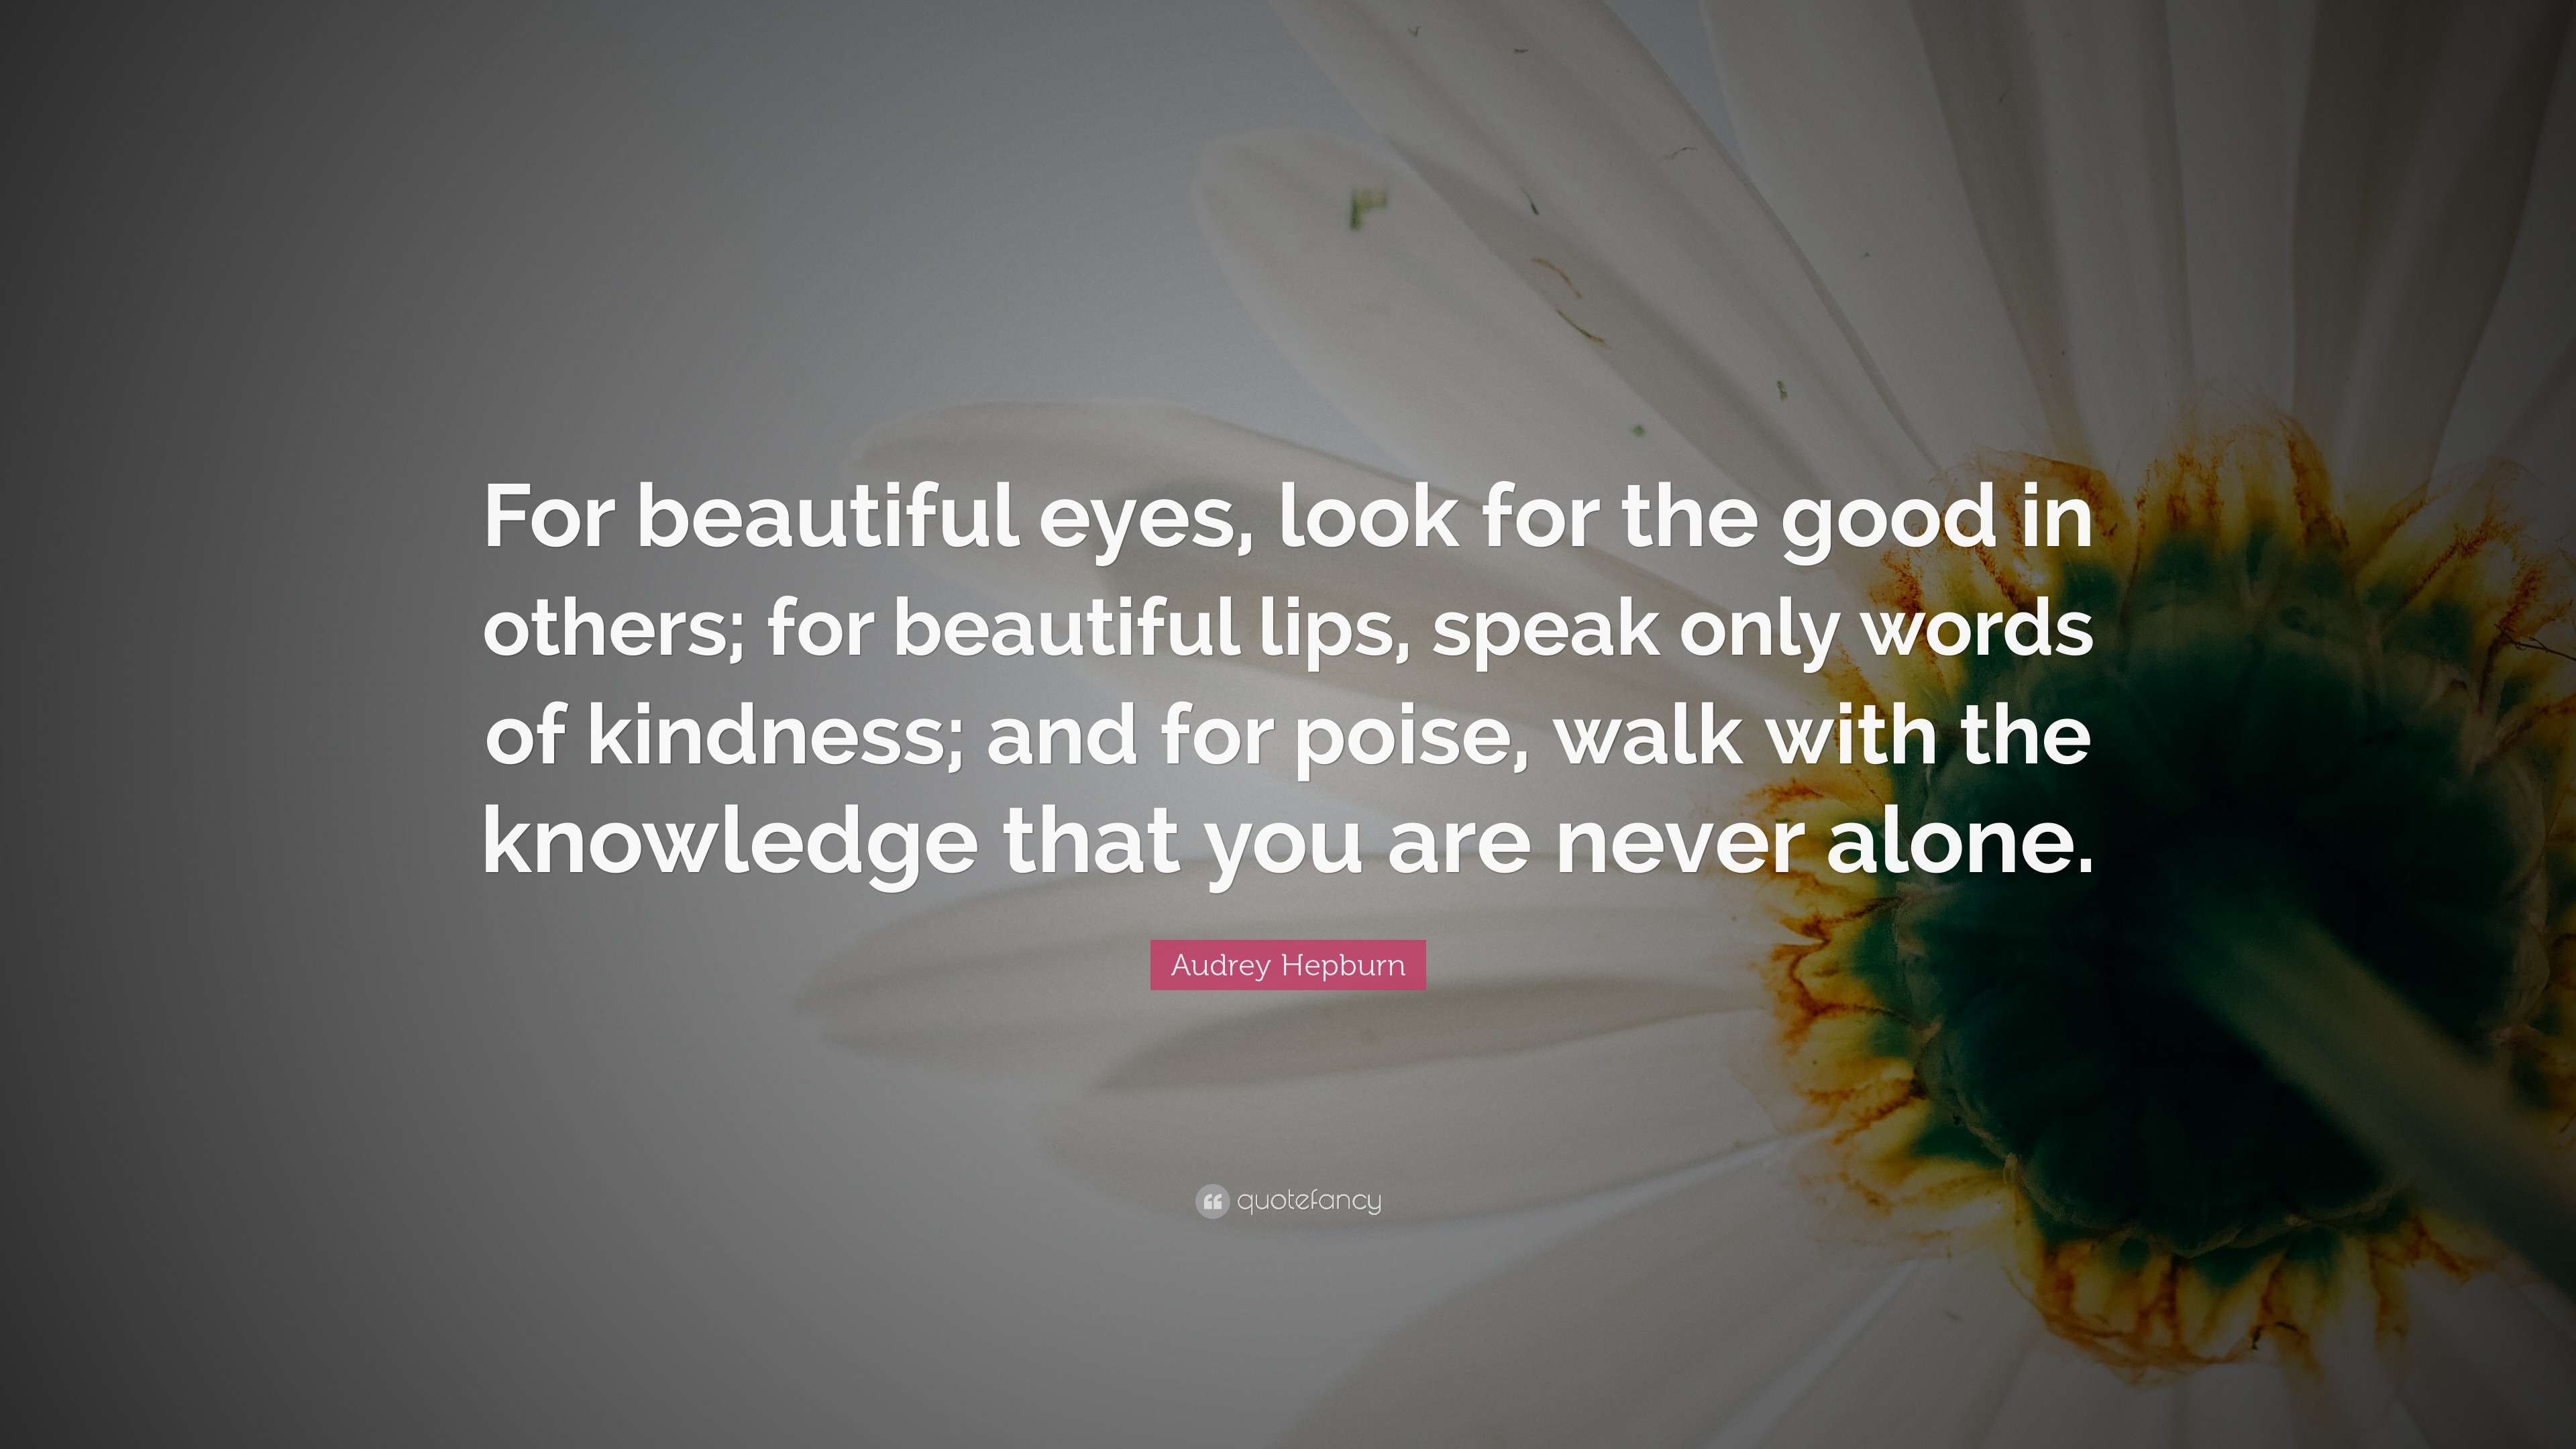 Audrey Hepburn Quote: “For beautiful eyes, look for the good in others ...